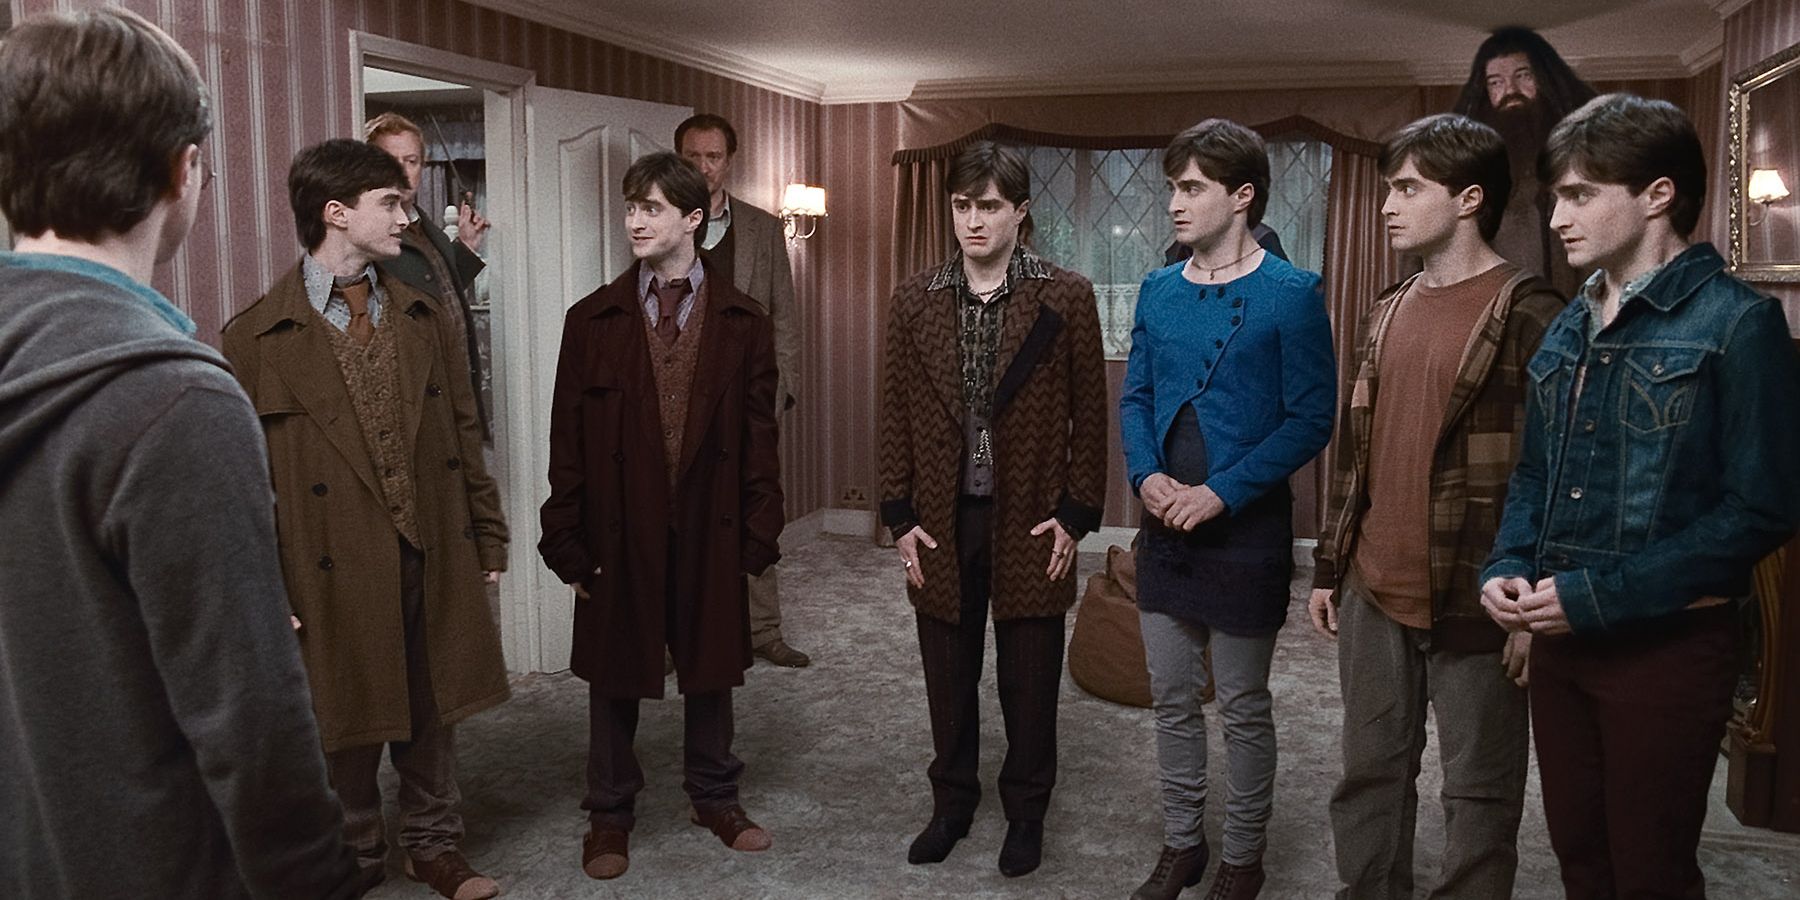 The seven Potters at Privet Drive in the Deathly Hallows